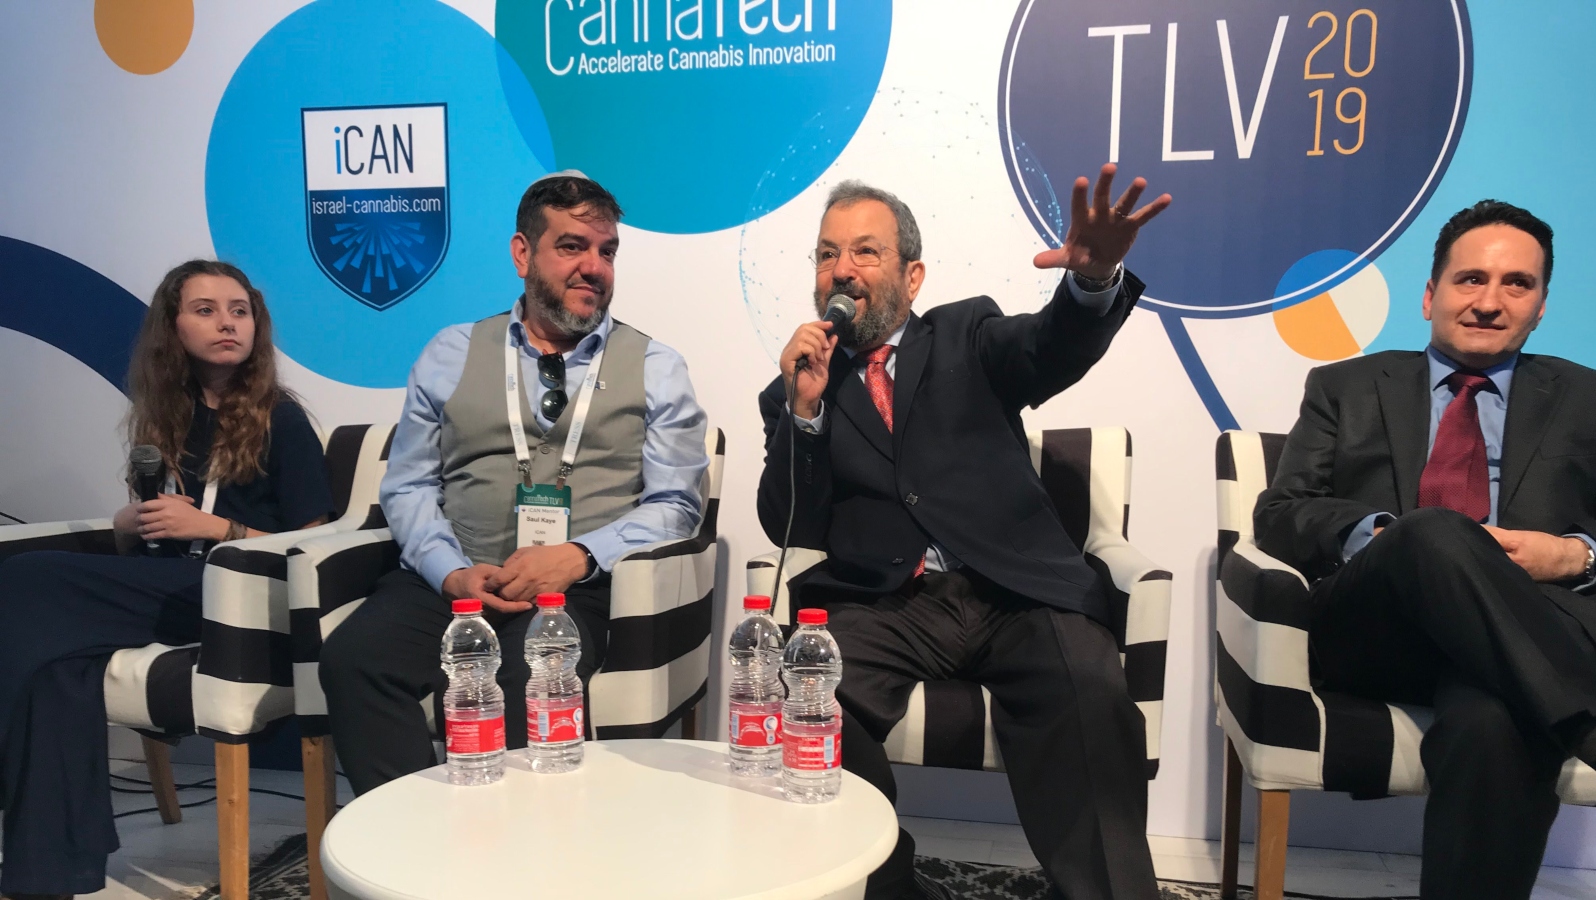 From left, medical cannabis user Rylie Maedler, CannaTech CEO Saul Kaye, Canndoc/Intercure Chairman Ehud Barak, and Alvit Pharma CEO Yona Levy at CannaTech 2019. Photo by Kam Global Strategies